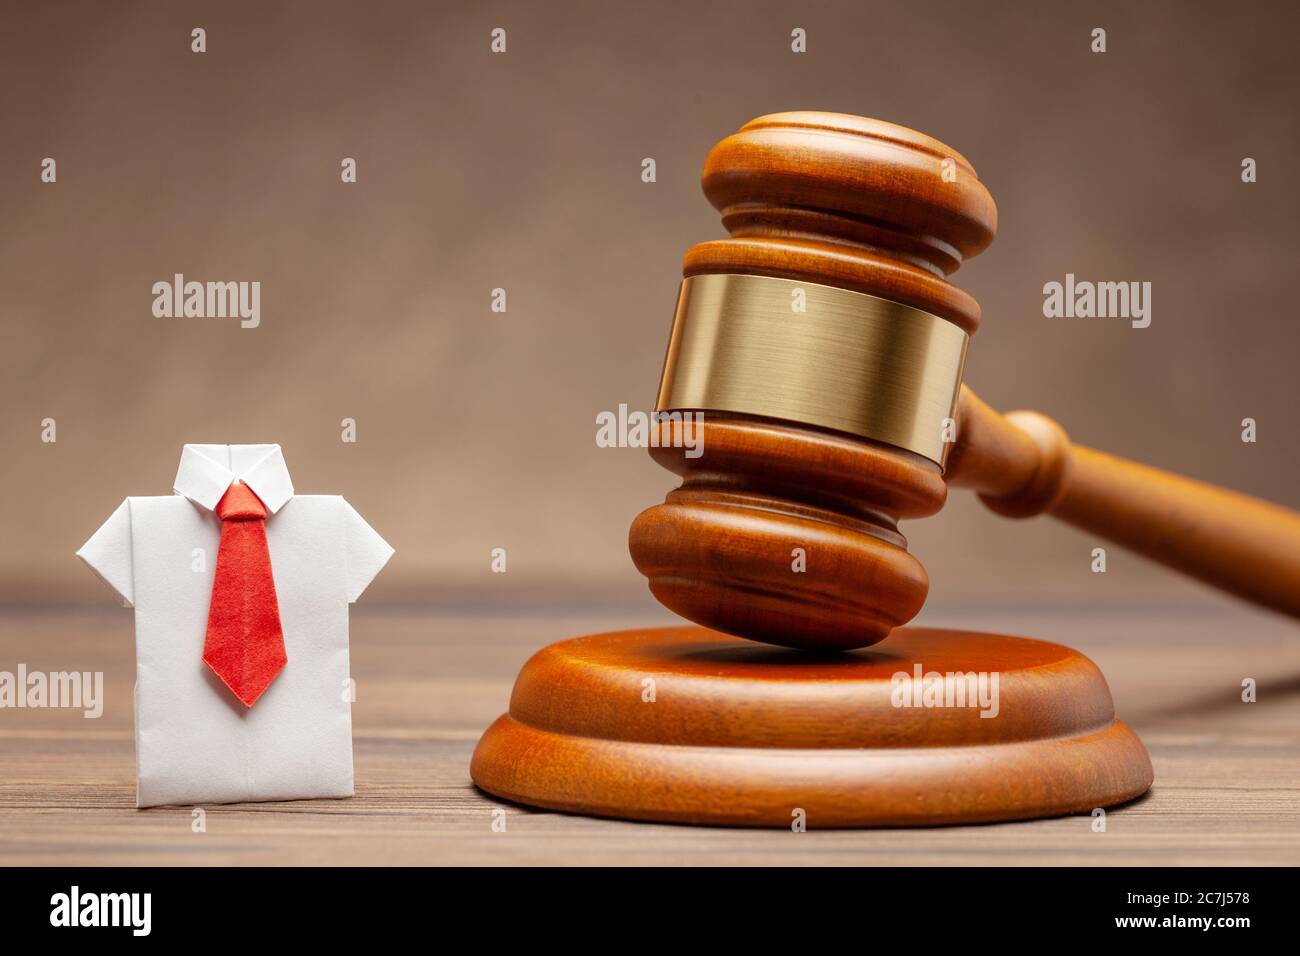 Businessman in shirt and tie and judge gavel on brown background. Concept of business sentence or condemnation of businessman. Stock Photo